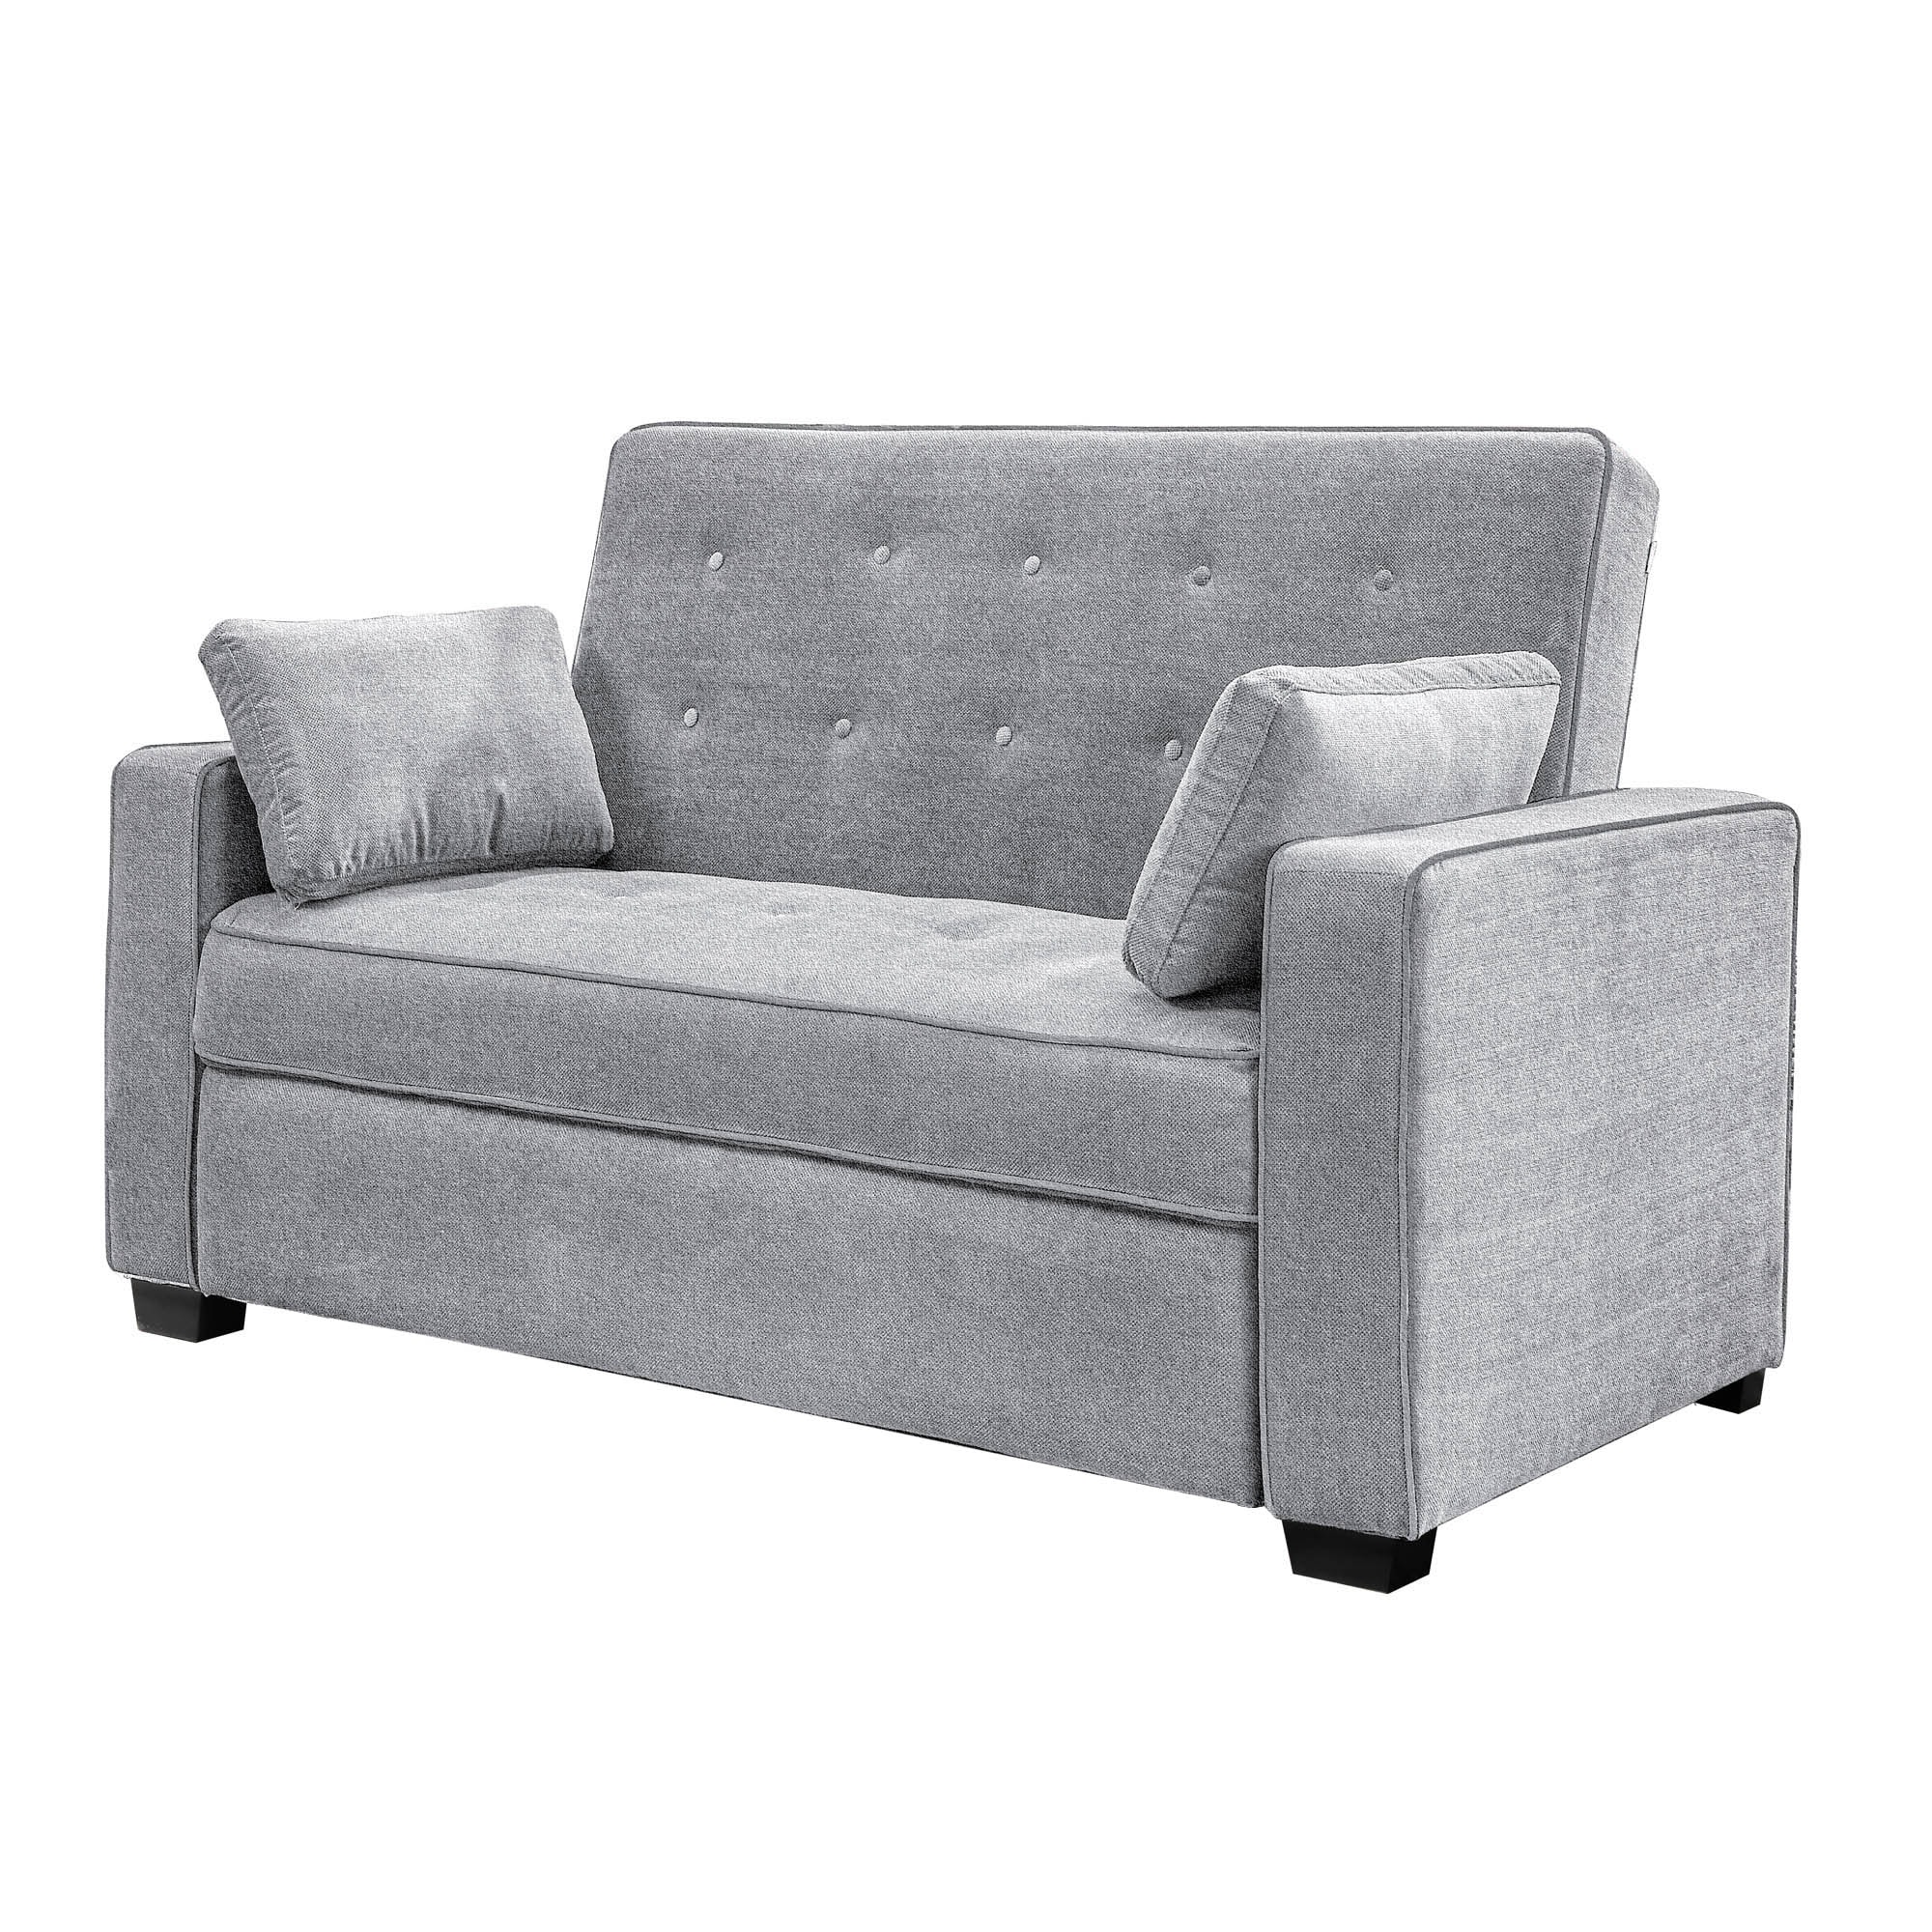 Serta Arya 66.5-in Modern Light Couches, Grey & department at Sofa the in Loveseats 2-seater Sofas Polyester/Blend